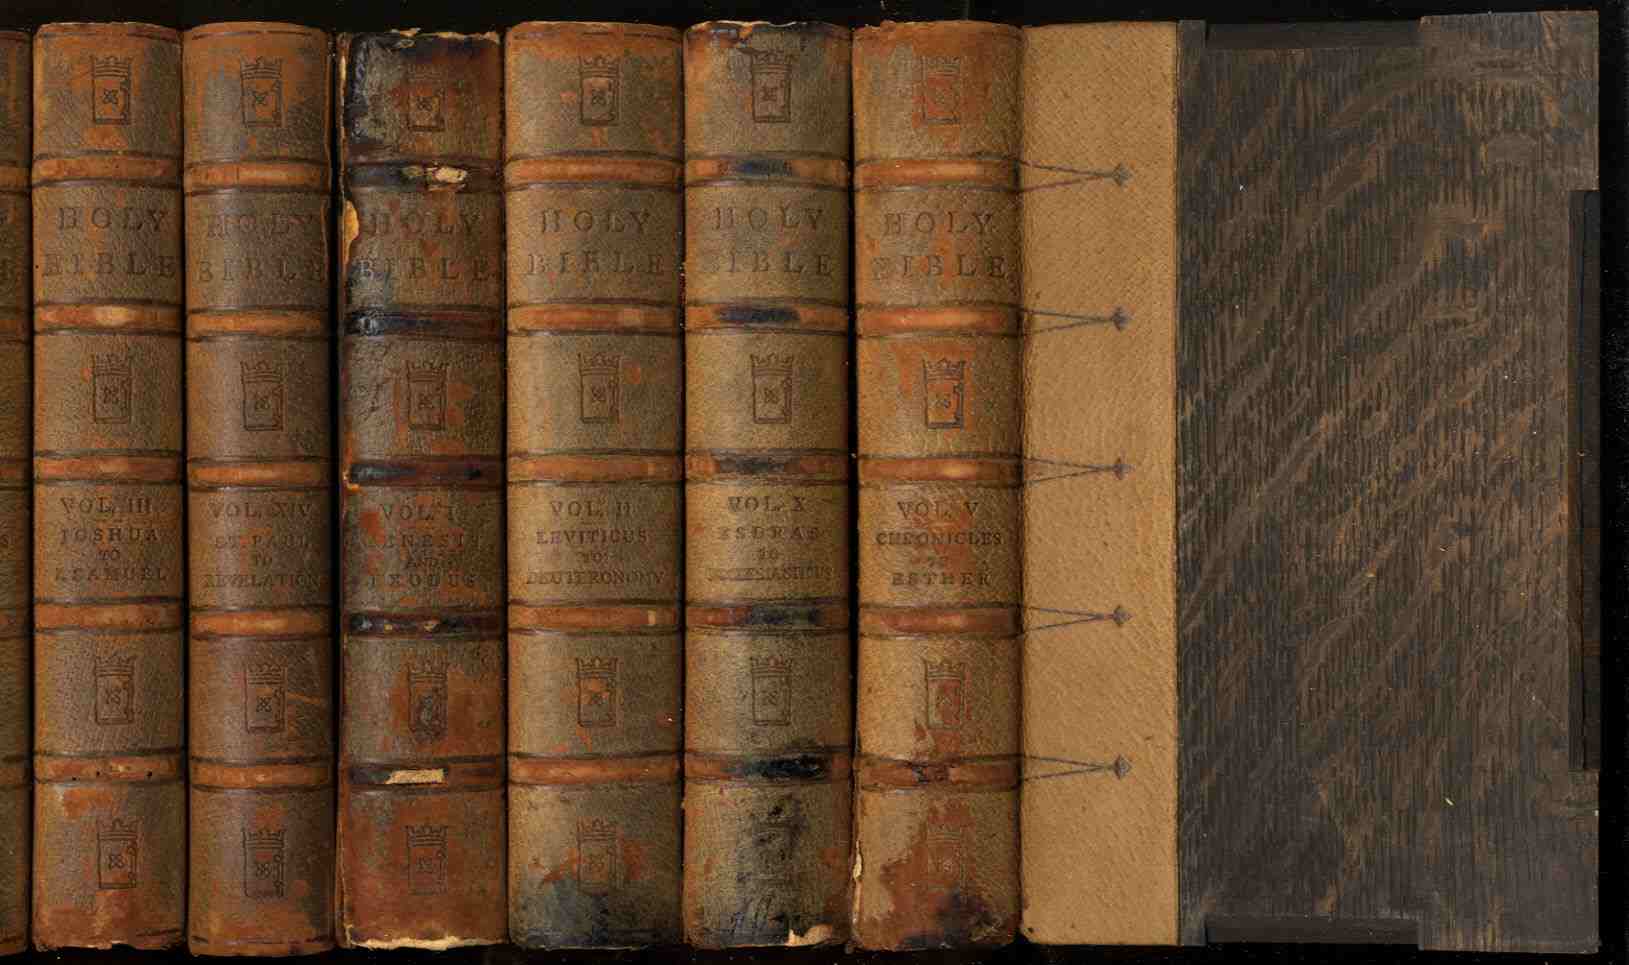 Image for THE HOLY BIBLE, CONTAINING THE OLD AND NEW TESTAMENTS AND THE APOCRYPHA (THE MERRYMOUNT BIBLE COMPLETE IN 14 VOLUMES WITH WOODEN BOARDS)  [G][Bx]